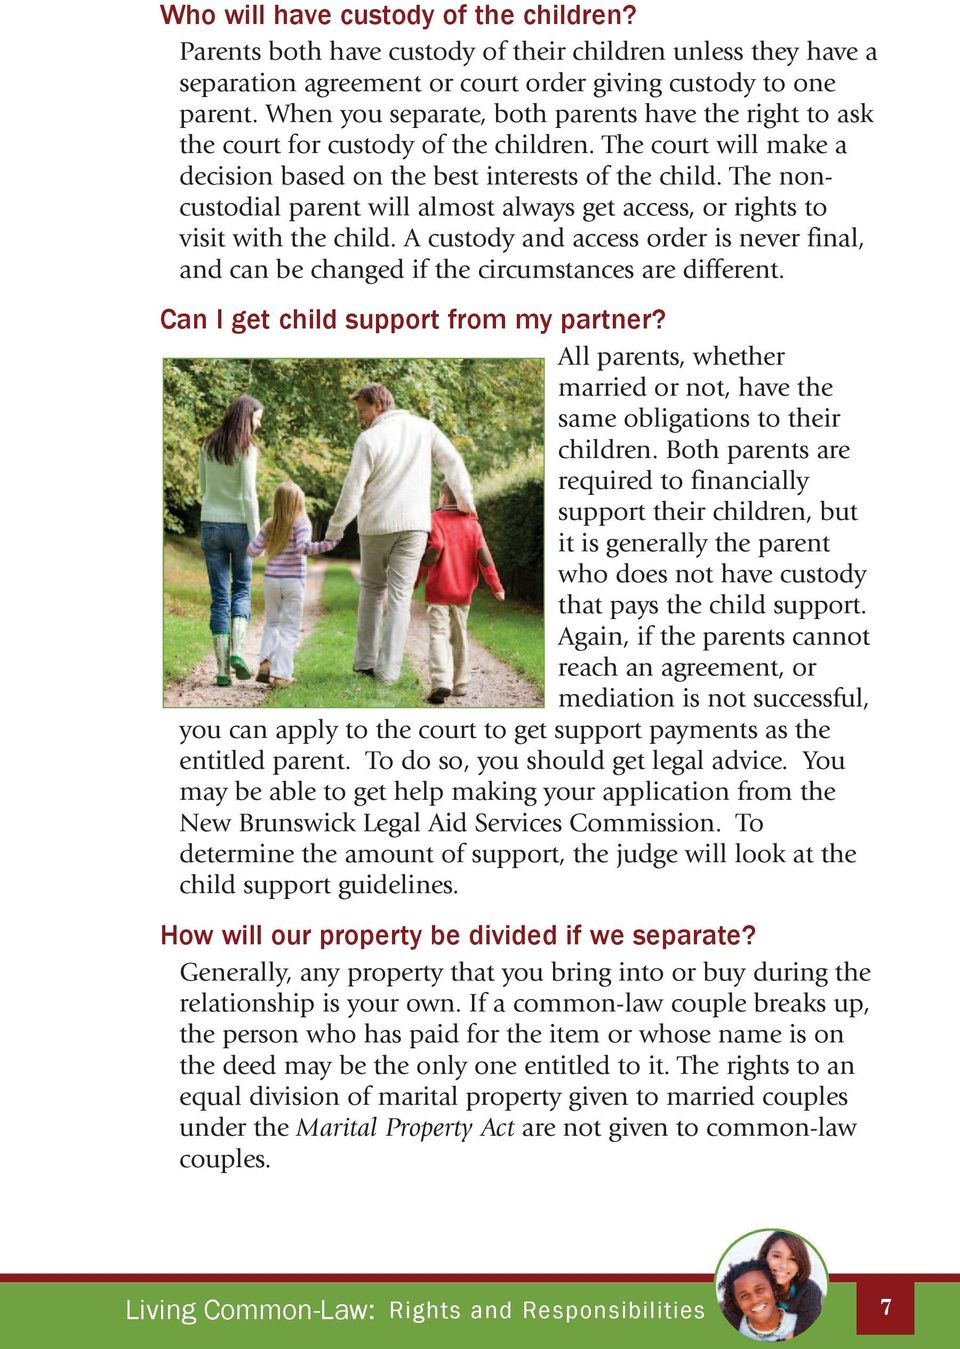 The noncustodial parent will almost always get access, or rights to visit with the child. A custody and access order is never final, and can be changed if the circumstances are different.